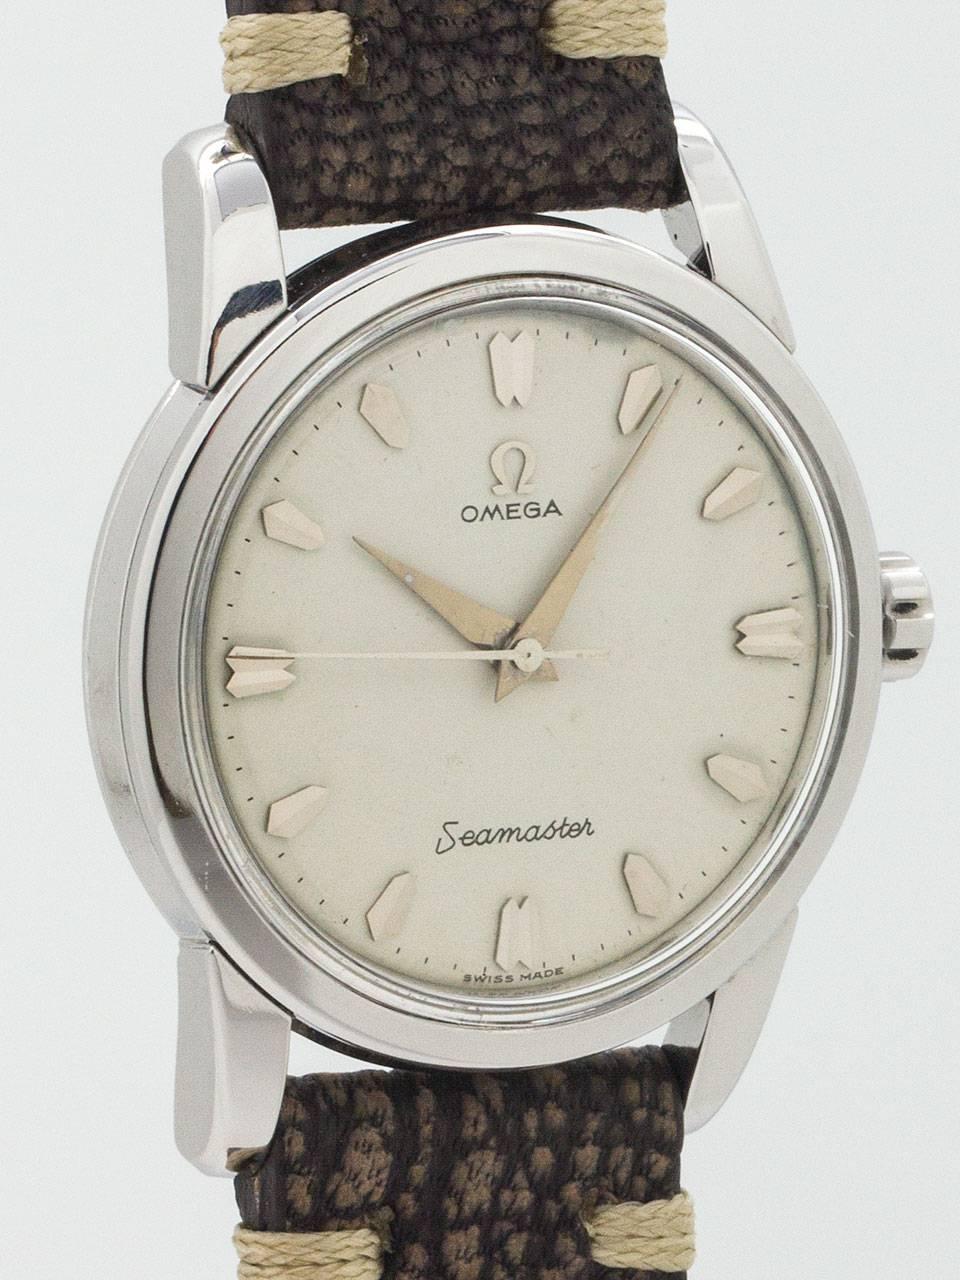 Omega Stainless Steel Seamaster Automatic Wristwatch ref 2759-02761  circa 1950s. Featuring 34 X 41mm heavy snap back case with wide bezel, elongated lugs and special Omega crown. Featuring acrylic crystal and very pleasing original antique white